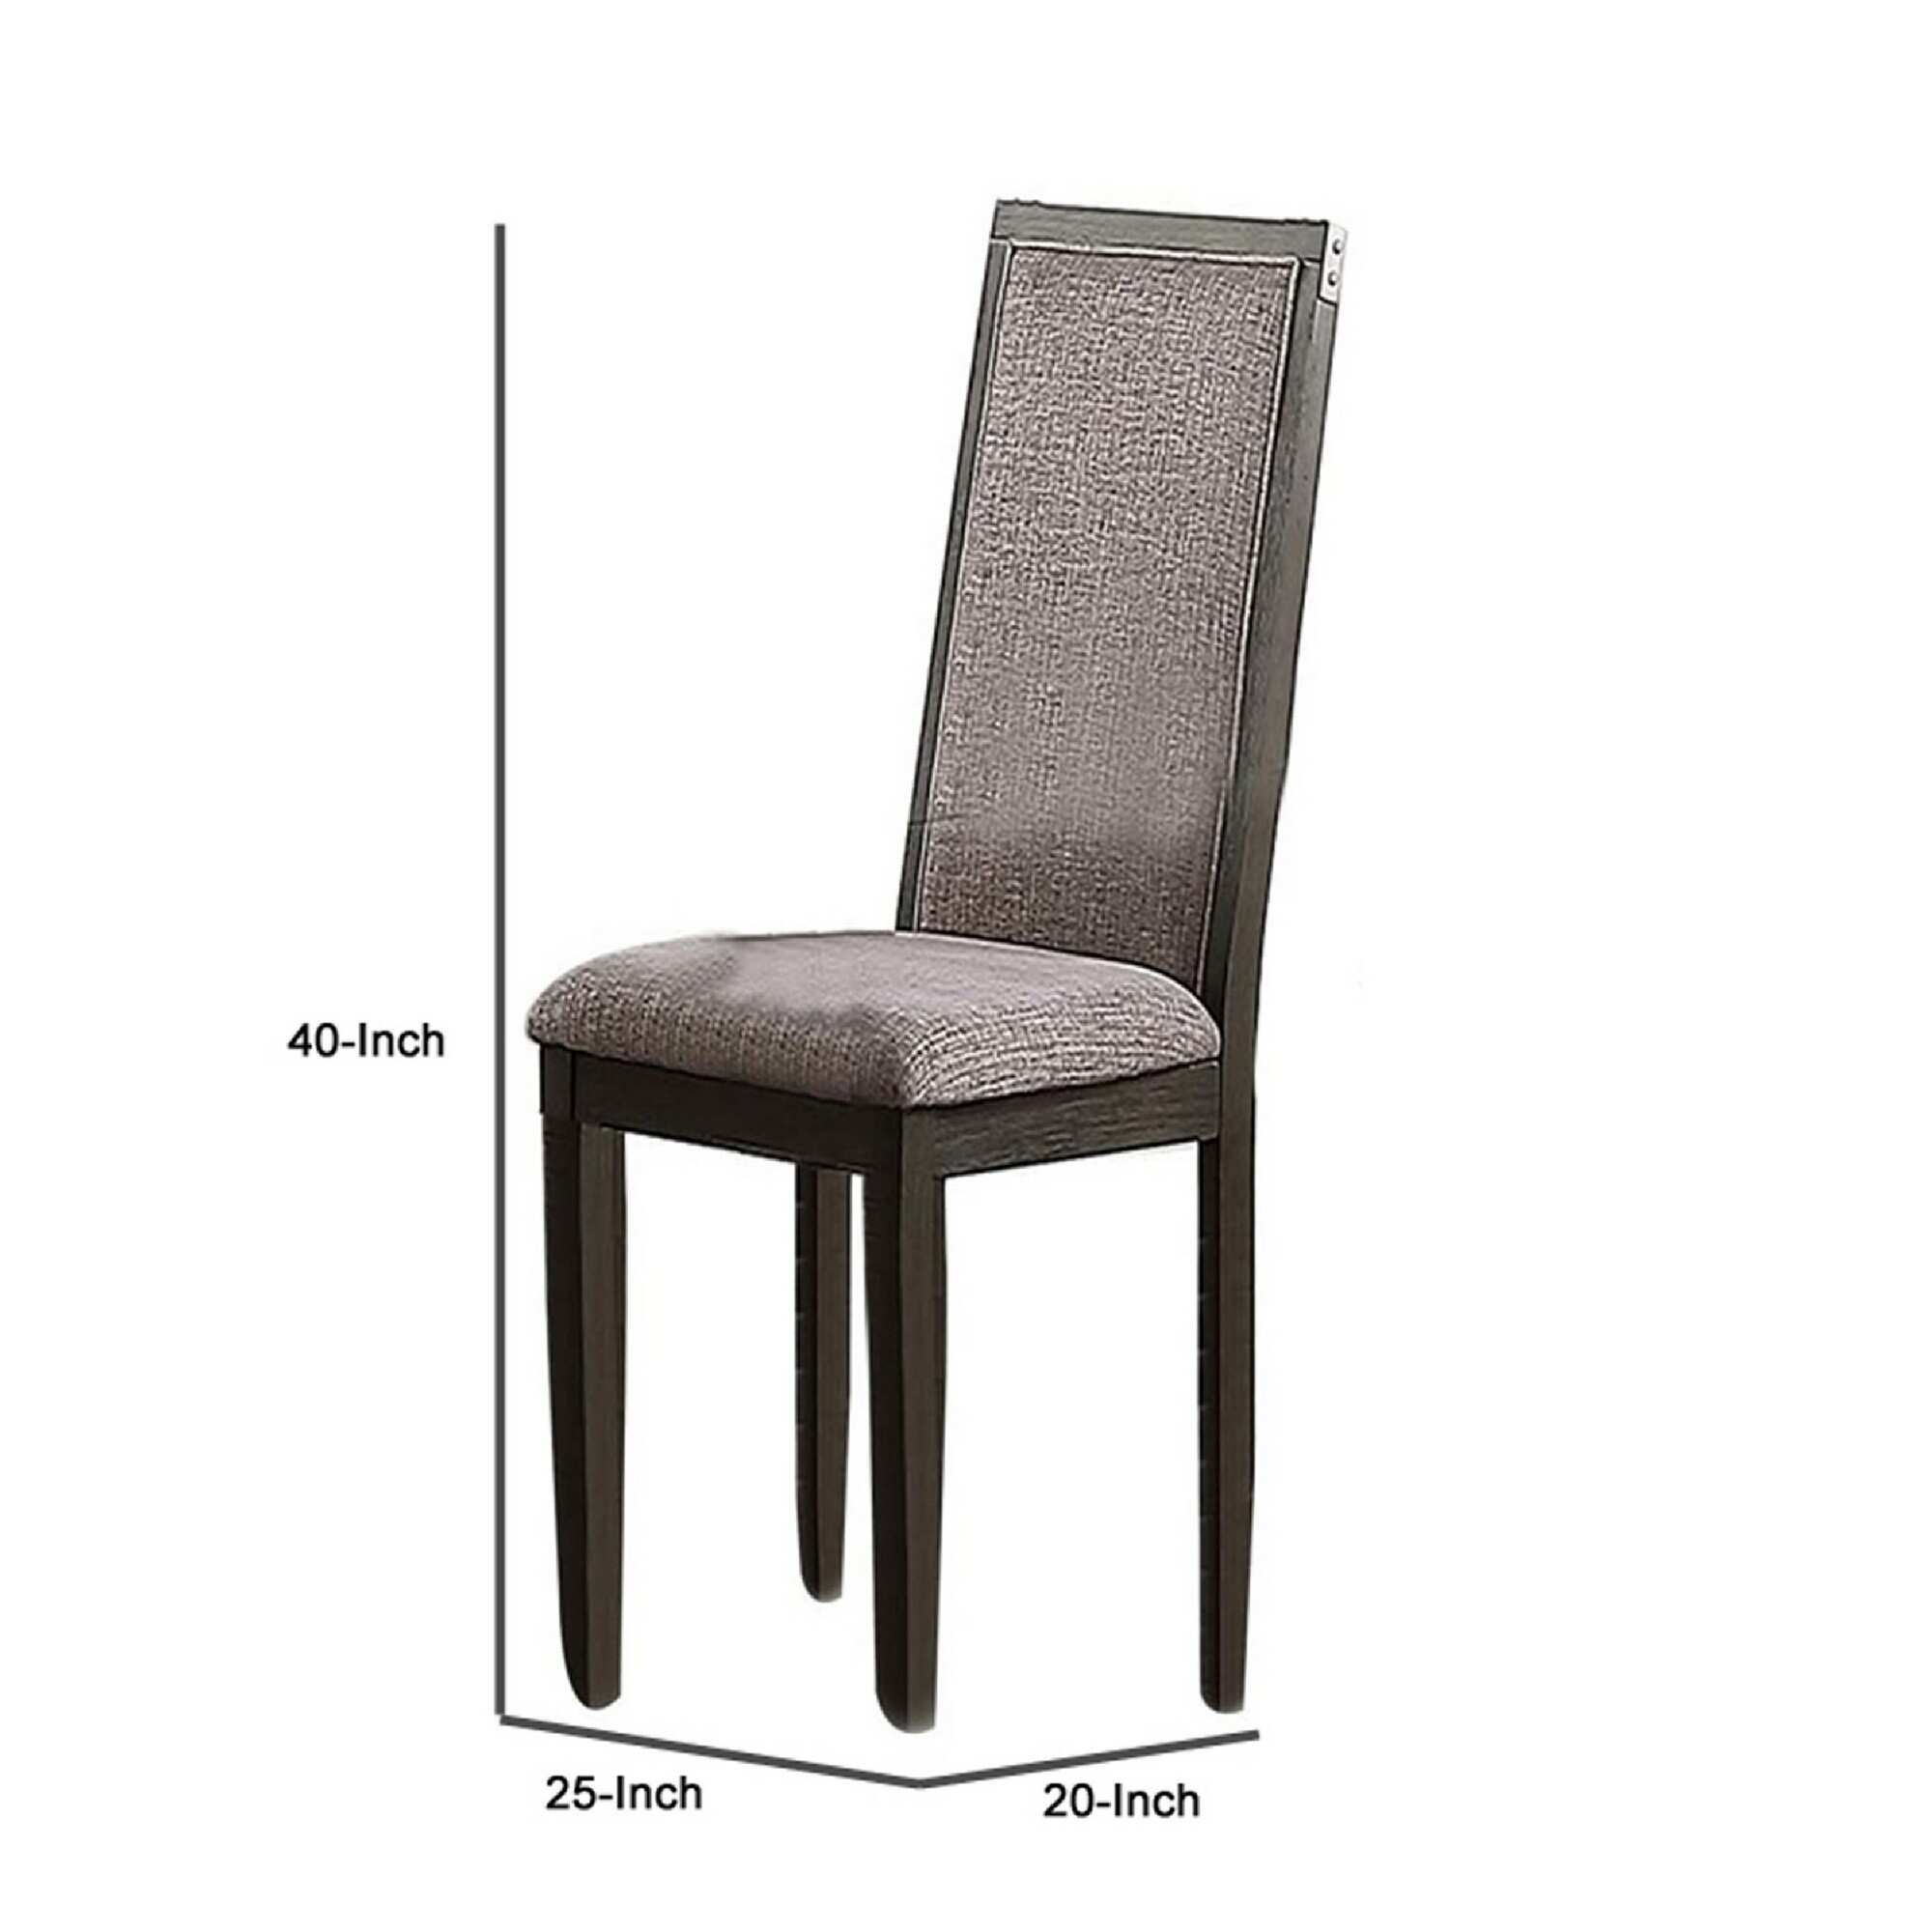 Kumi 25 Inch Set of 2 Wood Dining Chairs with Slatted Cushioned Backs, Gray